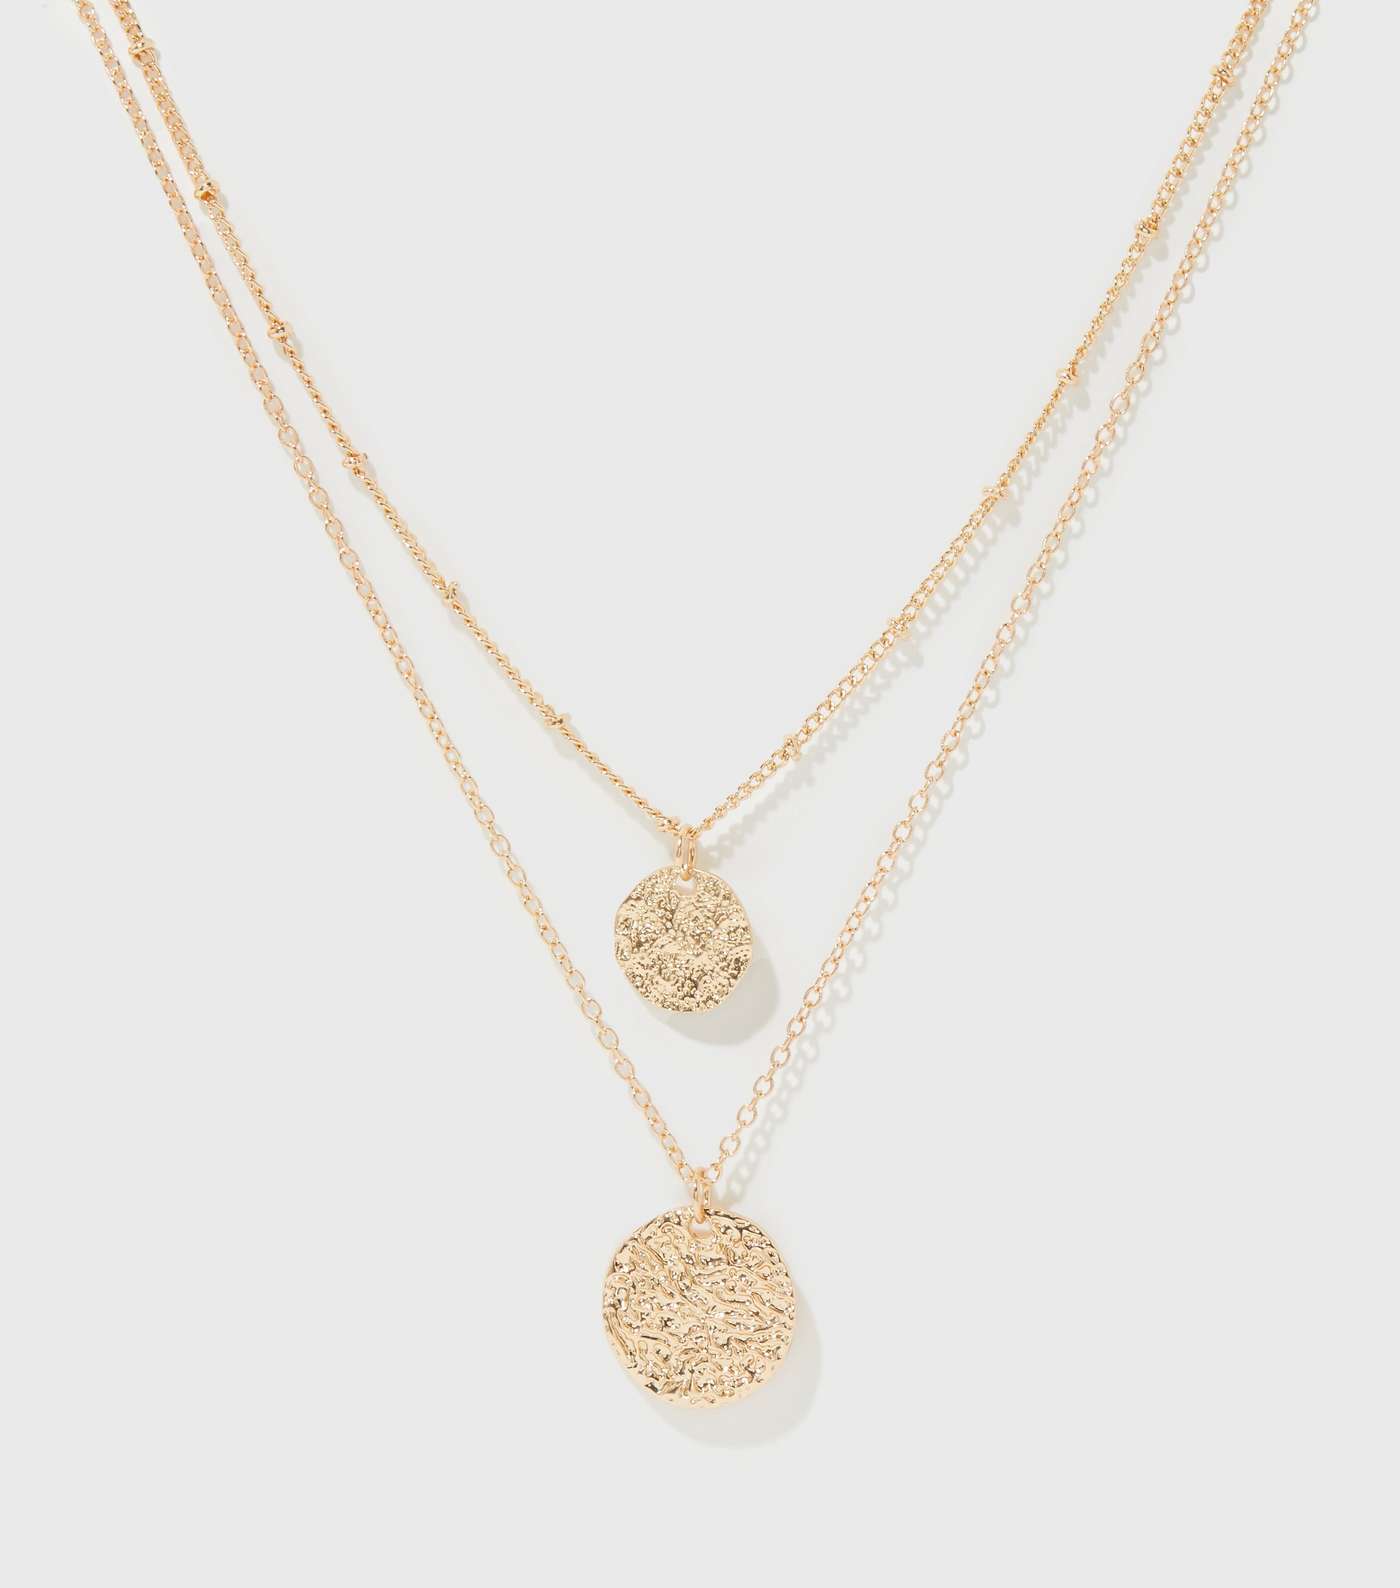 Gold Beaten Disc Pendant Layered Necklace Image 2